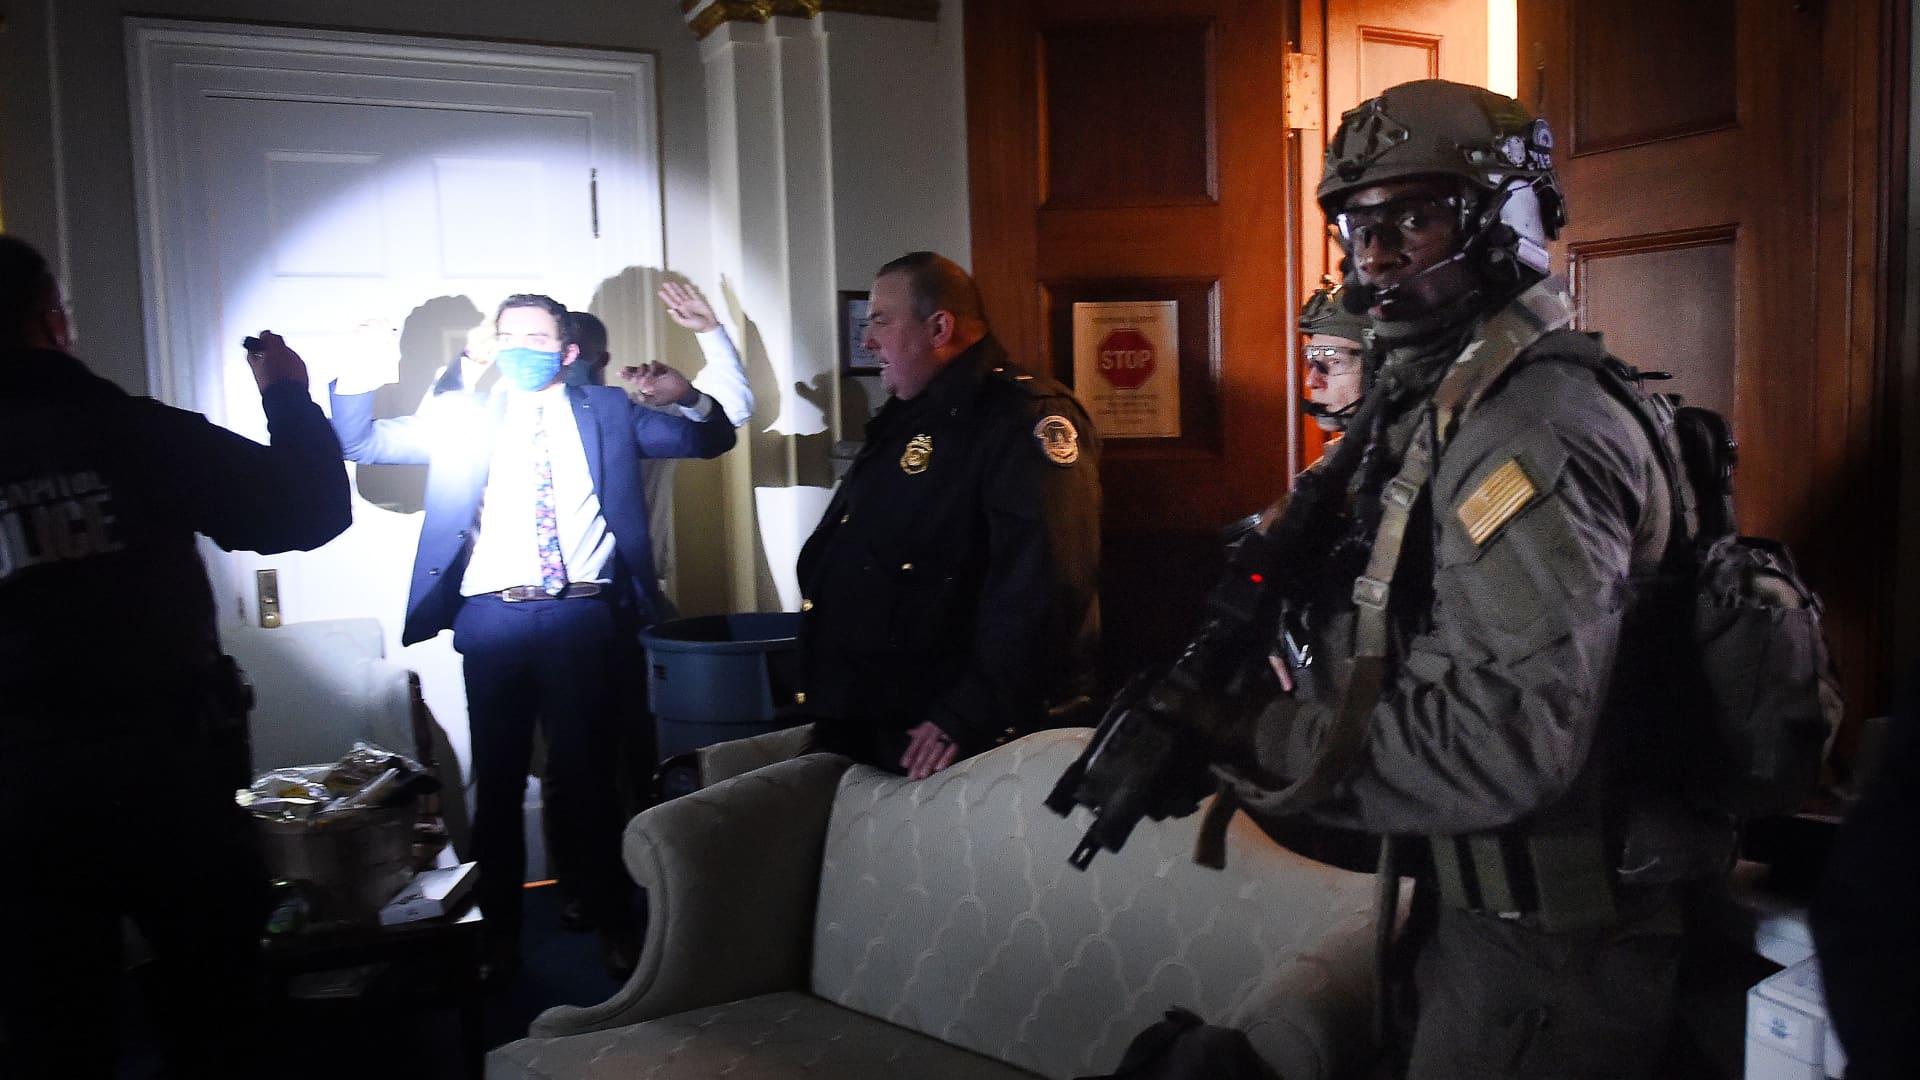 Congress staffers hold up their hands while Capitol Police Swat teams check everyone in the room as they secure the floor of Trump suporters in Washington, DC on January 6, 2021.